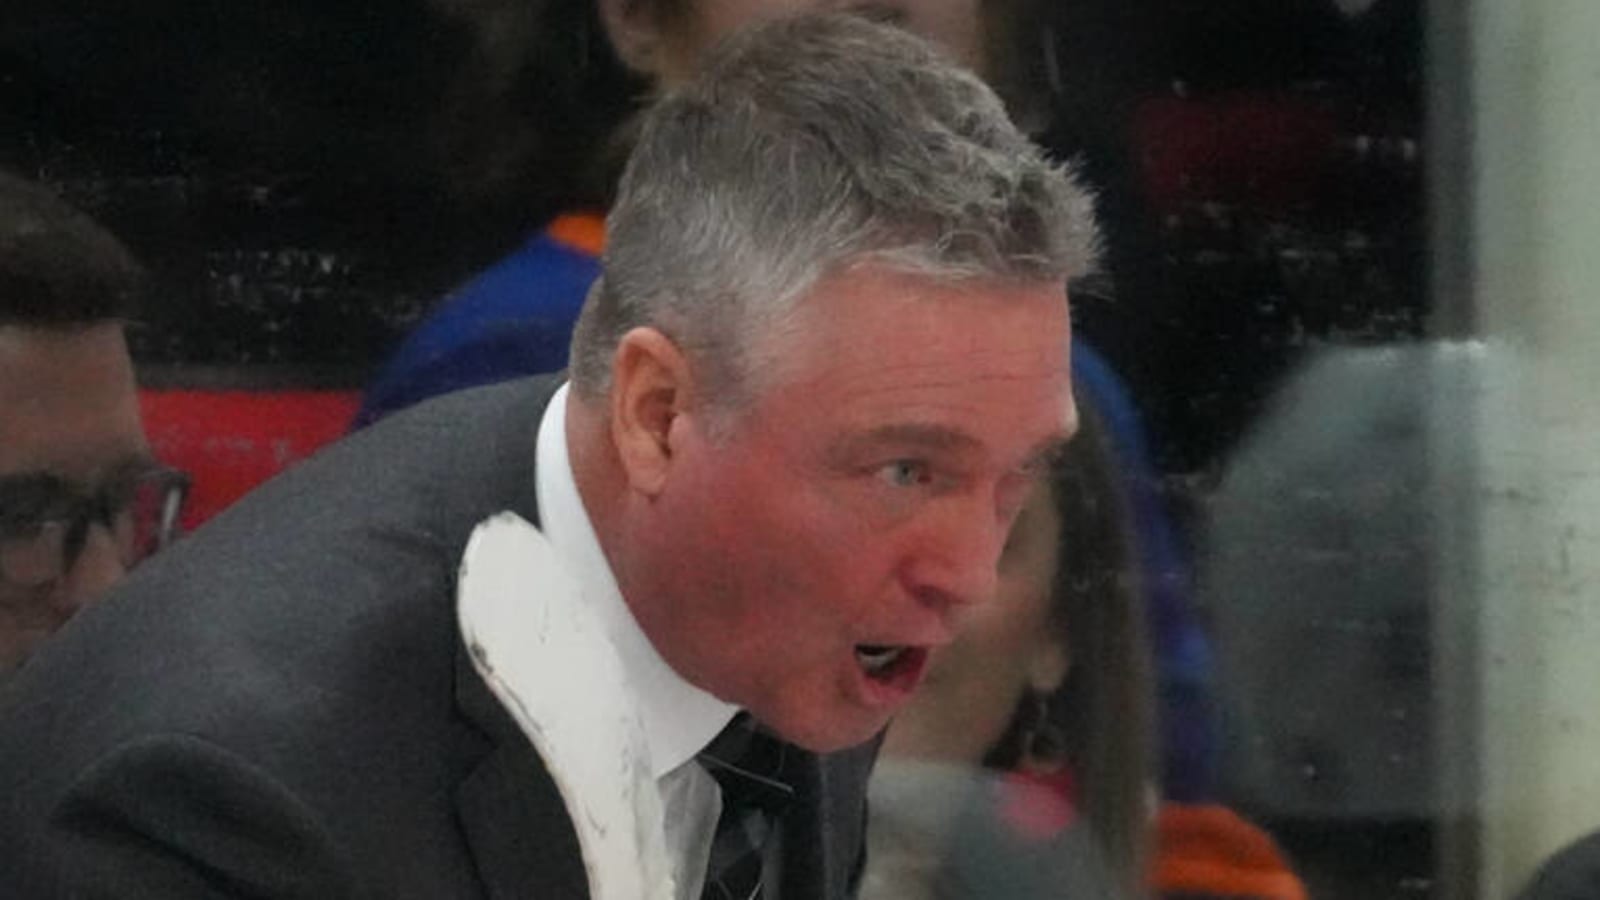 Islanders: players expect tough training camp under Patrick Roy